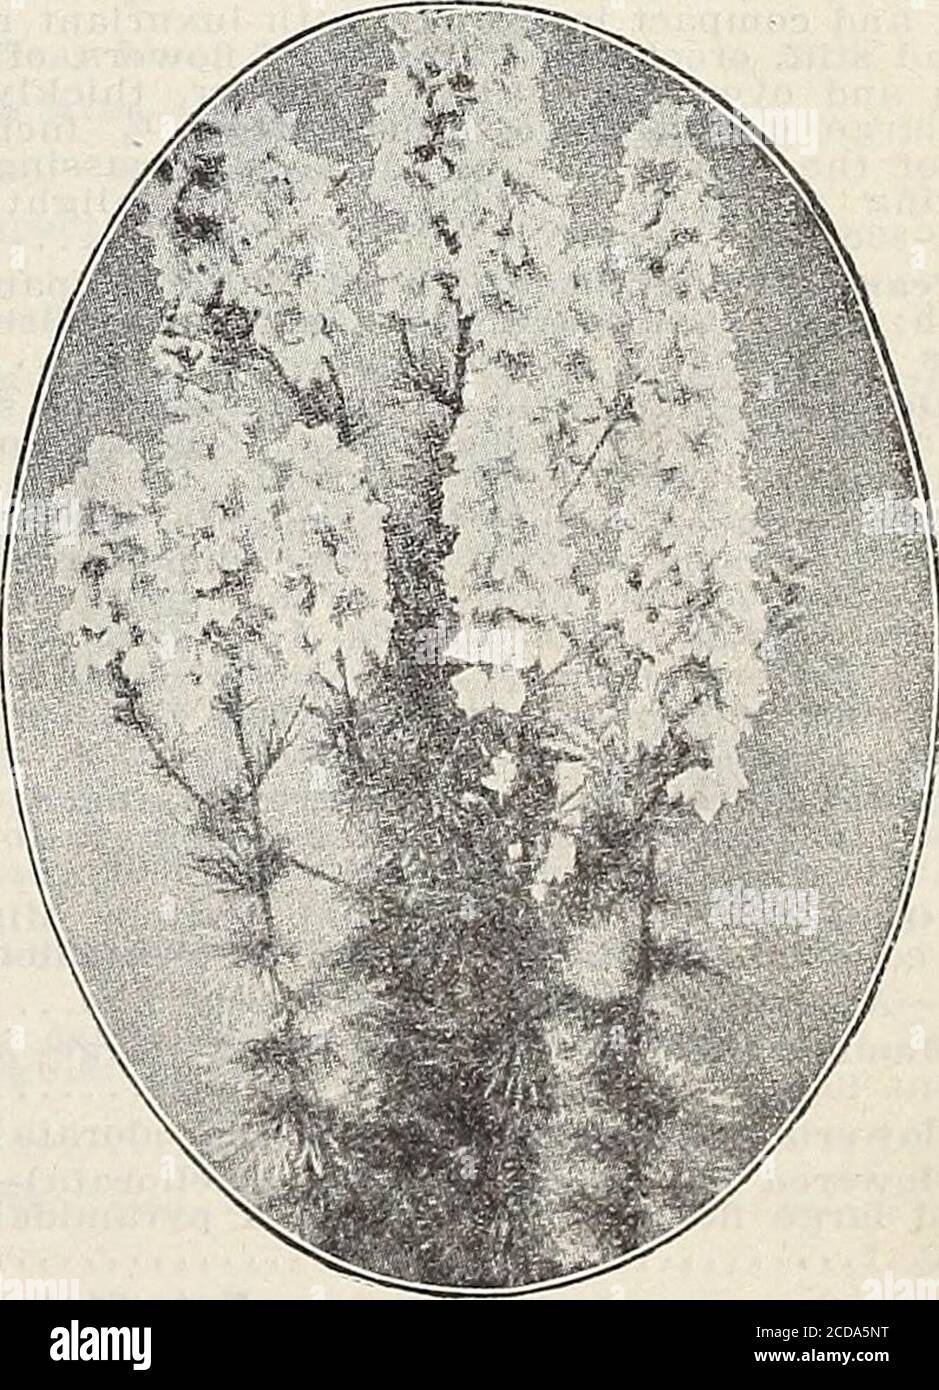 . Farm and garden annual : spring 1913 . mpacta—A beautiful deep blue variety. y2 foot 10 Puinila Magniiica—The finest of all dwarfs,s very dark blue. % foot 10 Speeiosa White Gem—A new pure white variety, fine for bedding. y2 foot 10 Erinus Compacta Goldelse—Yellow foliage, flowers blue 10Nana Compacta Coerulea—A fine dwarf bright blue bed-ding variety LOBELIA TENUIOR—Large flowered, dark blue. Acharming sort for vases and pots; very free flowering; height 1 foot TRAILING LOBELIA.Gracilis—Light Blue. ... 5 Rosea—Pink 5 HARDY LOBELIAS. Cardinalis, Cardinal Flower—Flower spikes 8 inches long, o Stock Photo